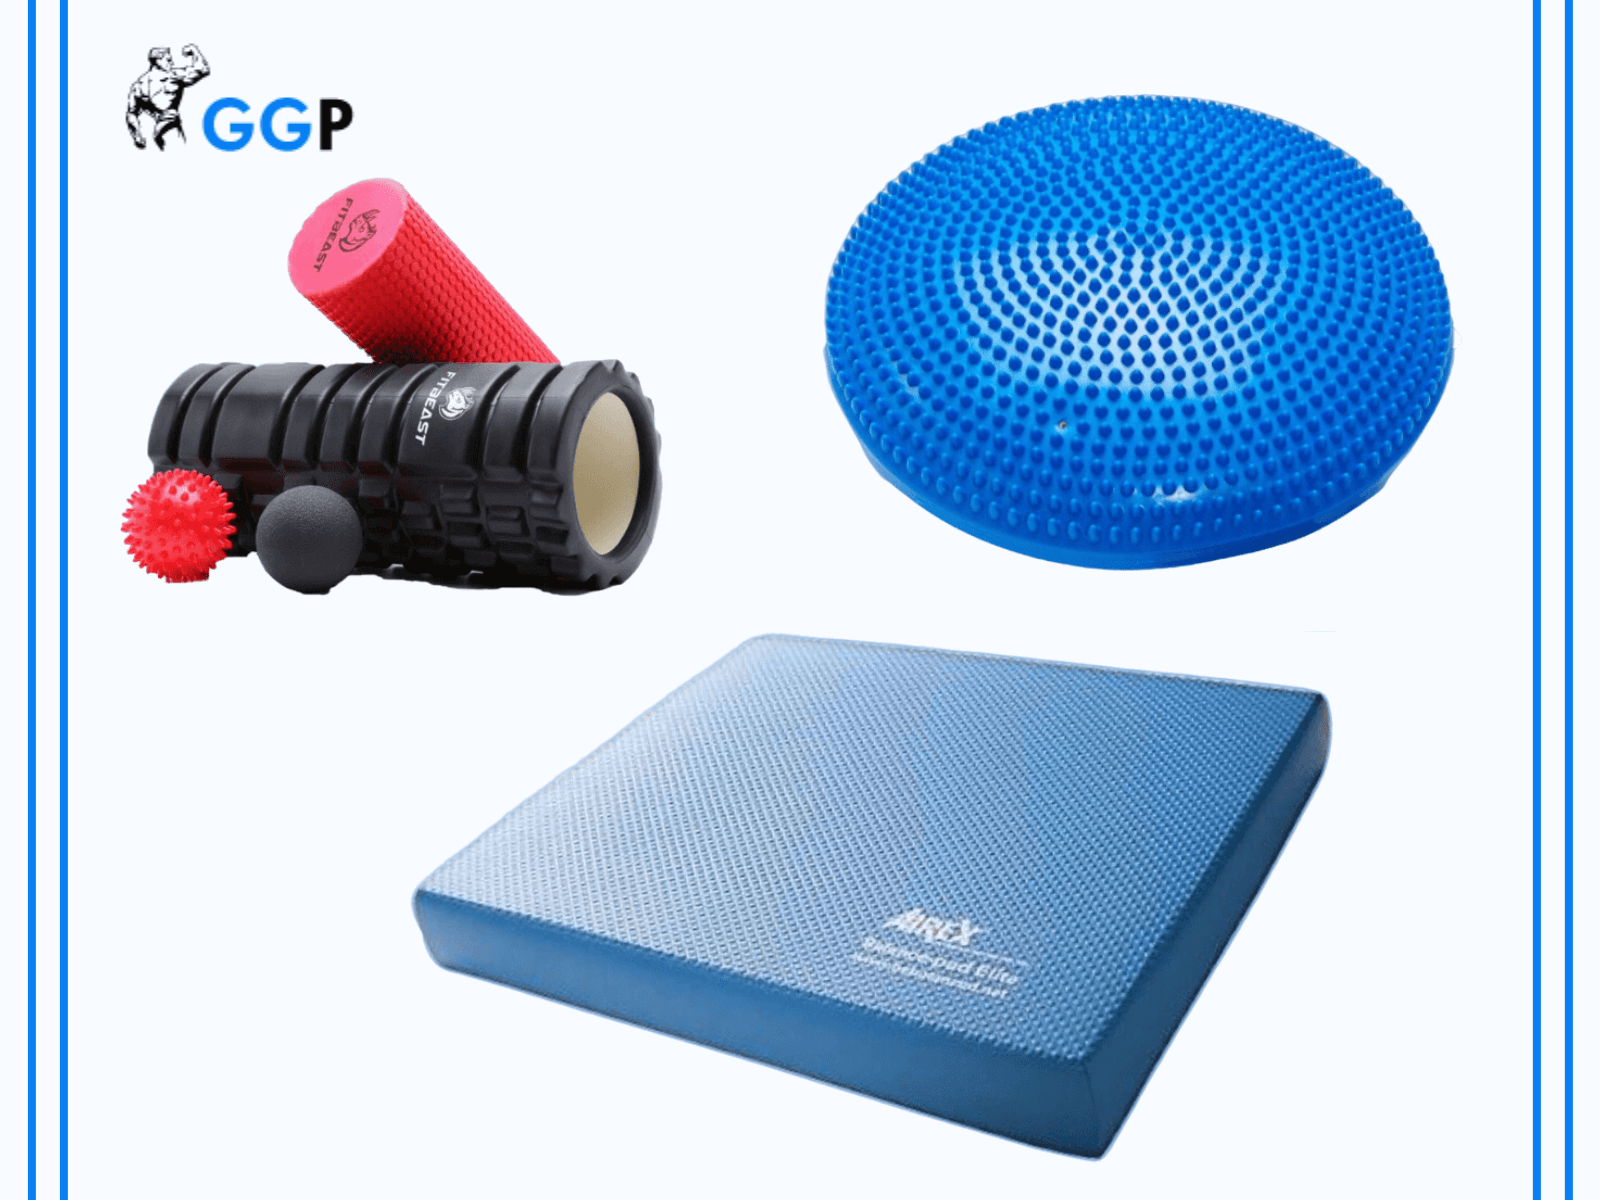 Flexibility And Balance Tools such as Yoga mats, Stability balls, Foam rollers